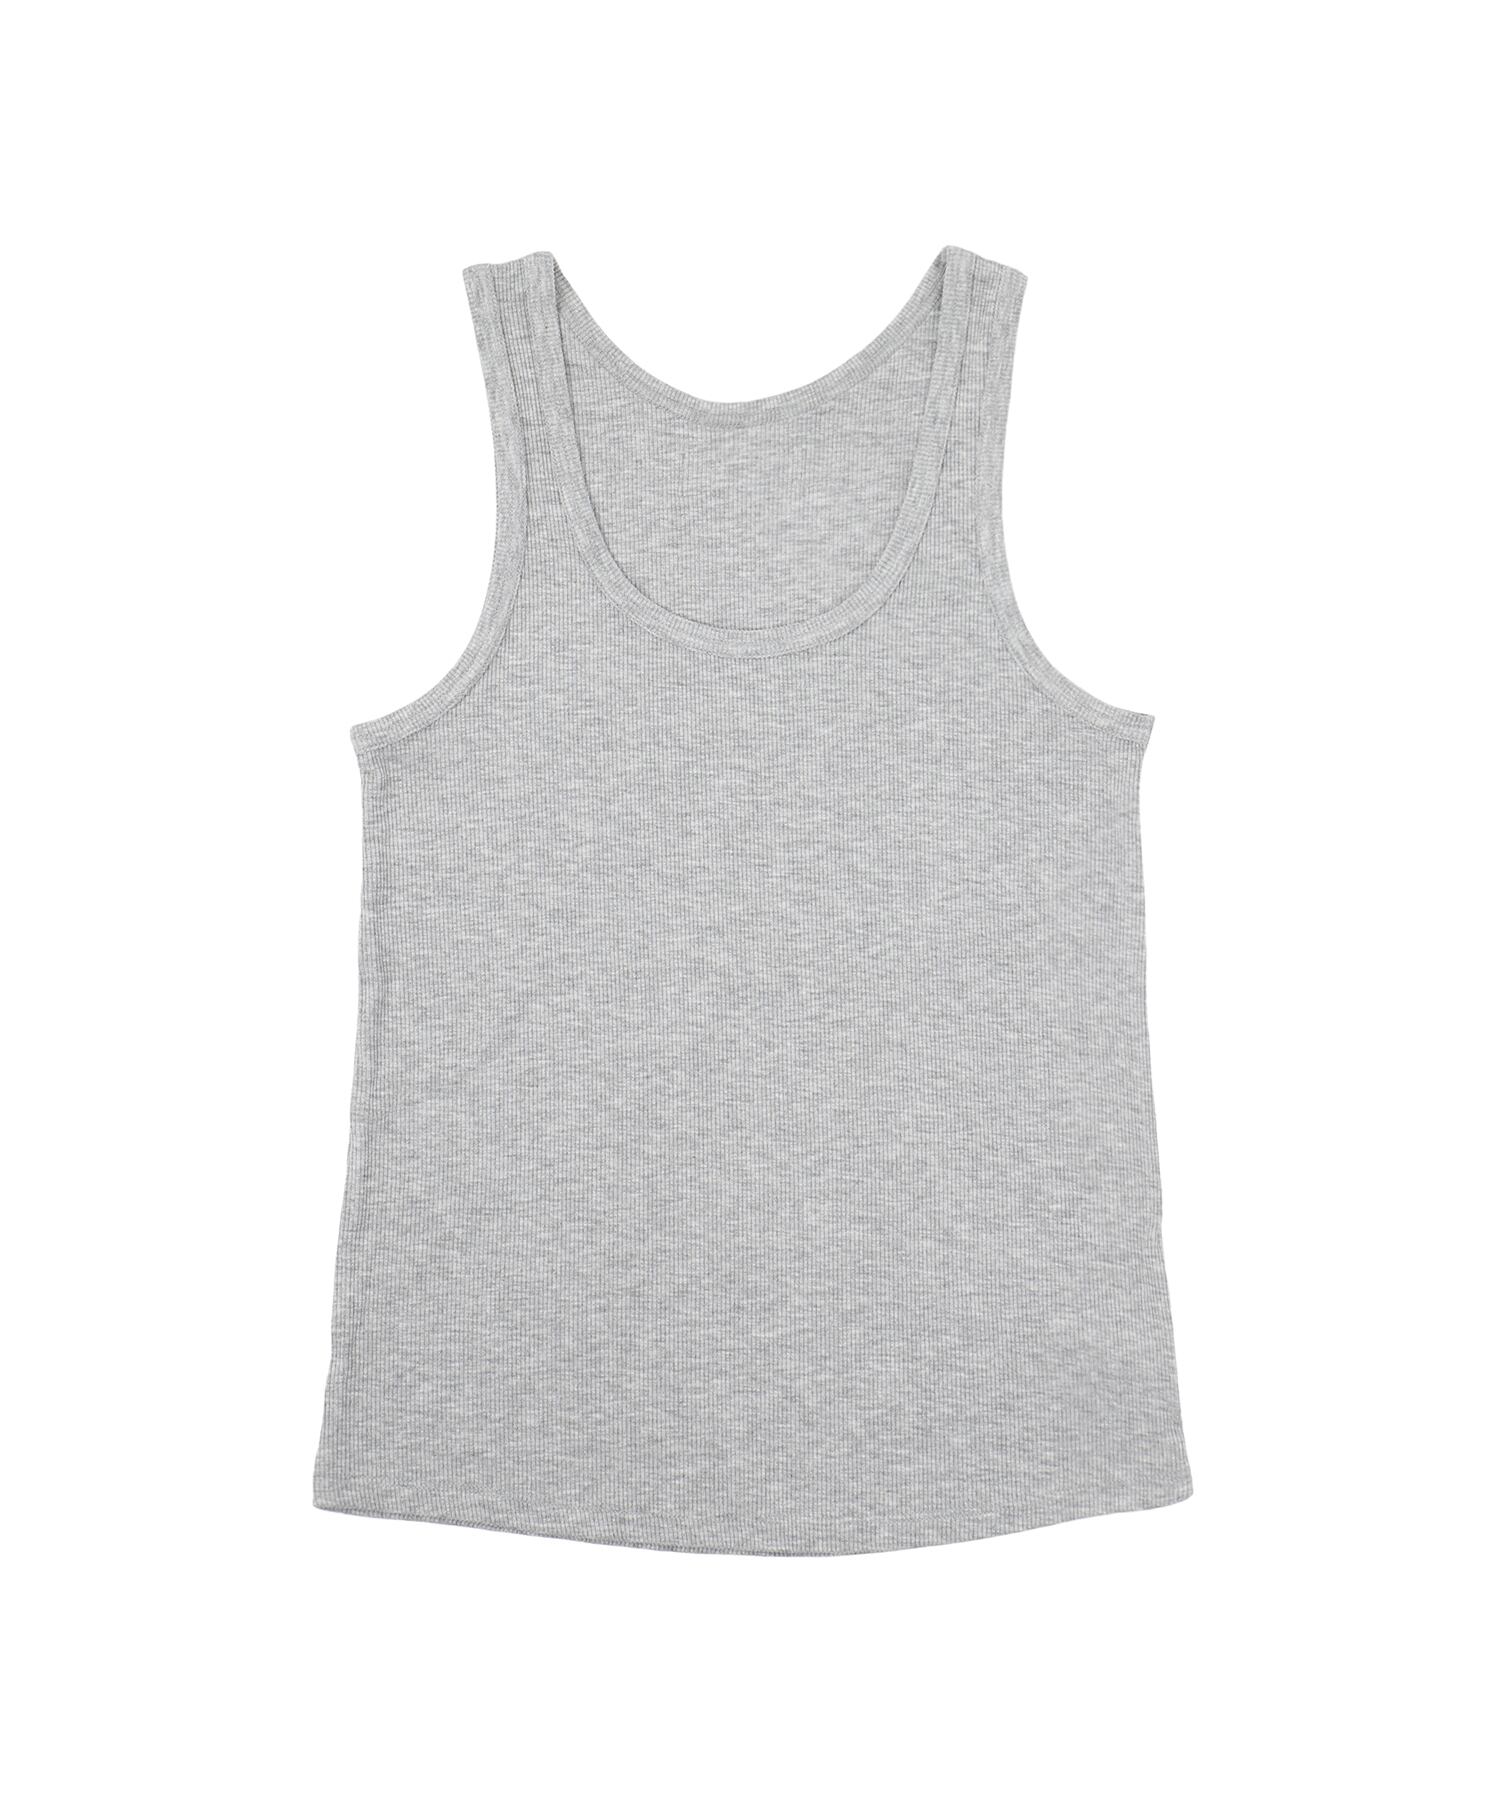 Daily soft loose tank